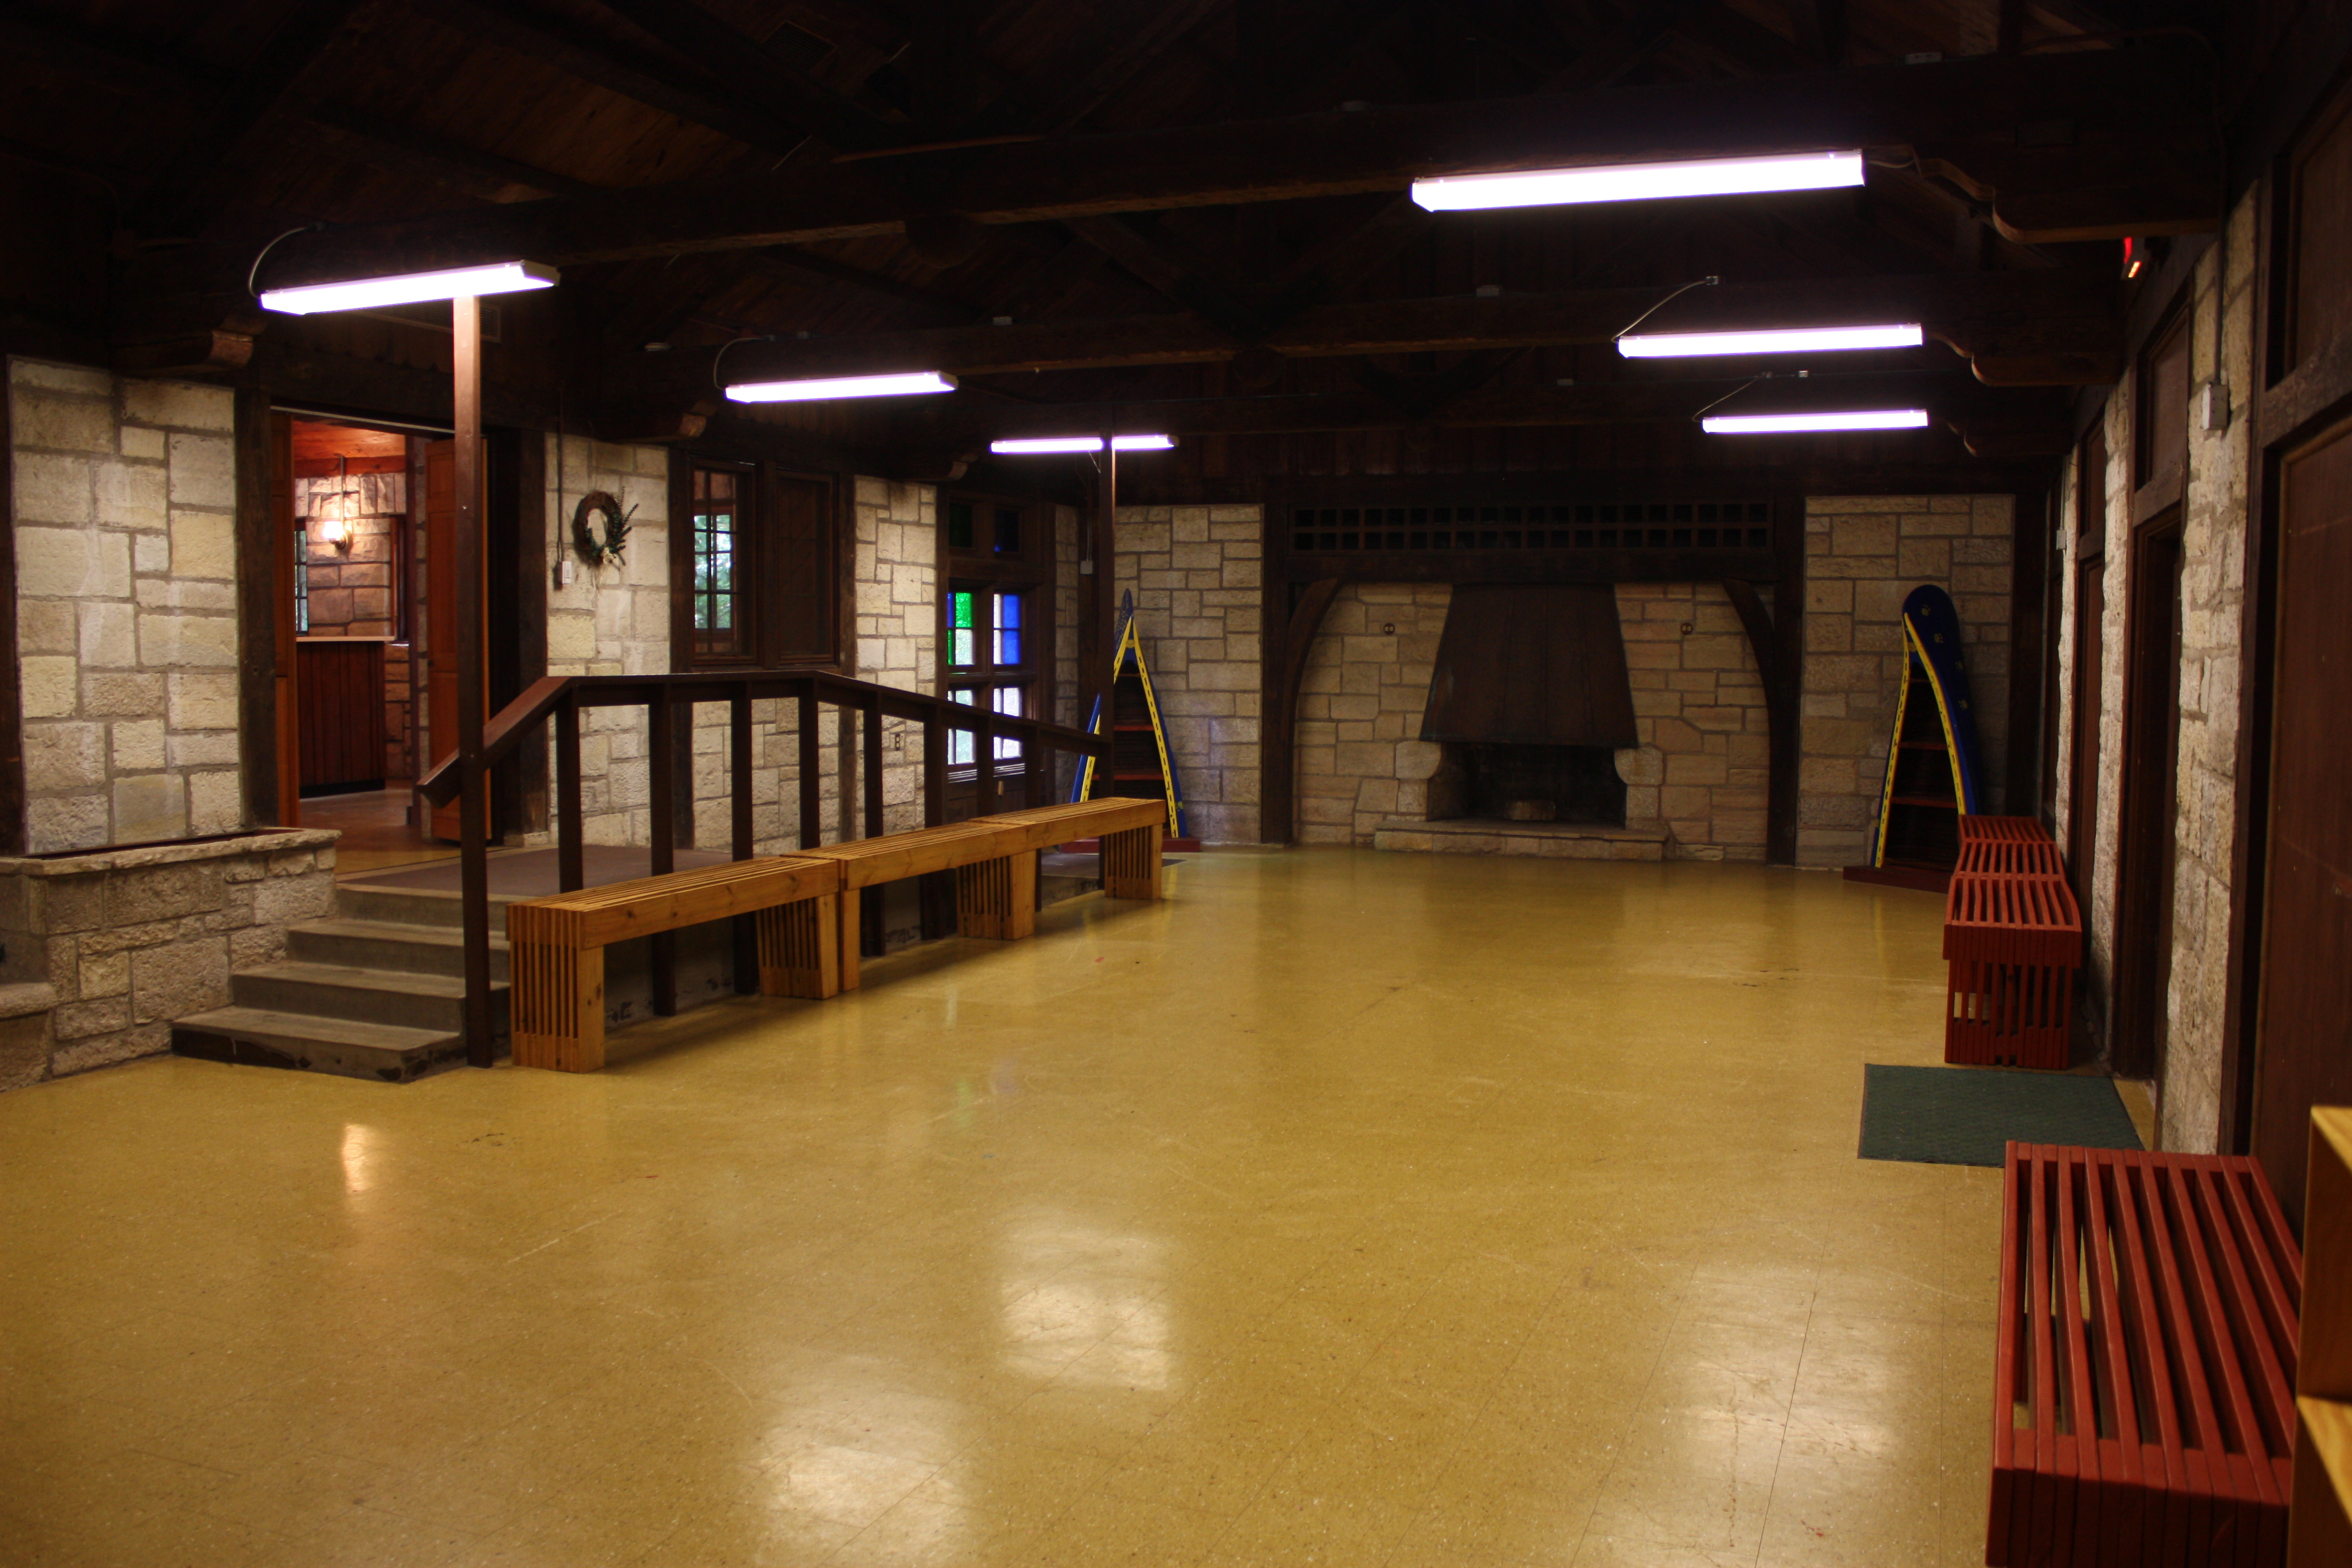 The main room of the enclosed shelter - an open area with a tile floor and benches along the walls